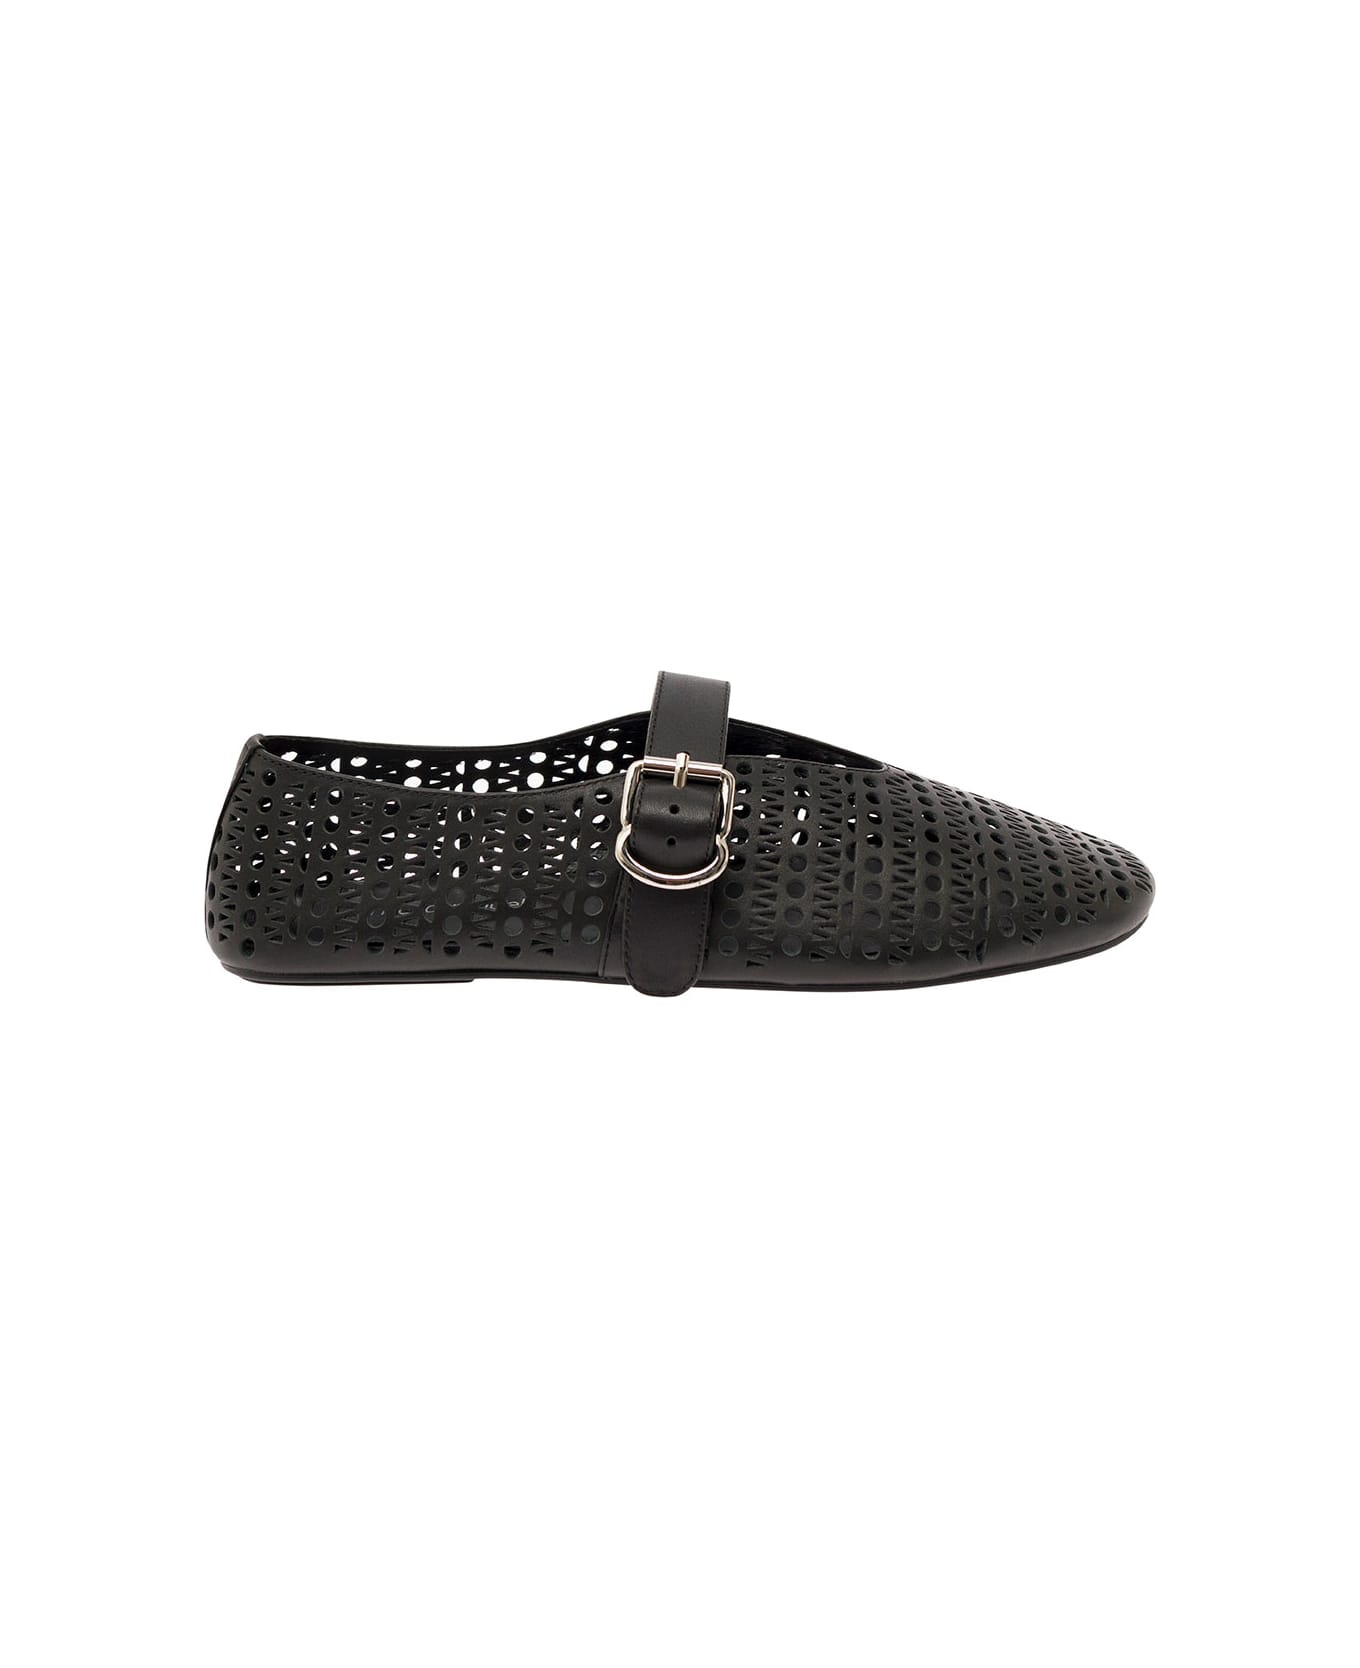 Jeffrey Campbell 'shelly' Black Ballet Flats With Maxi Buckle In Lace Effect Leather Woman - Black